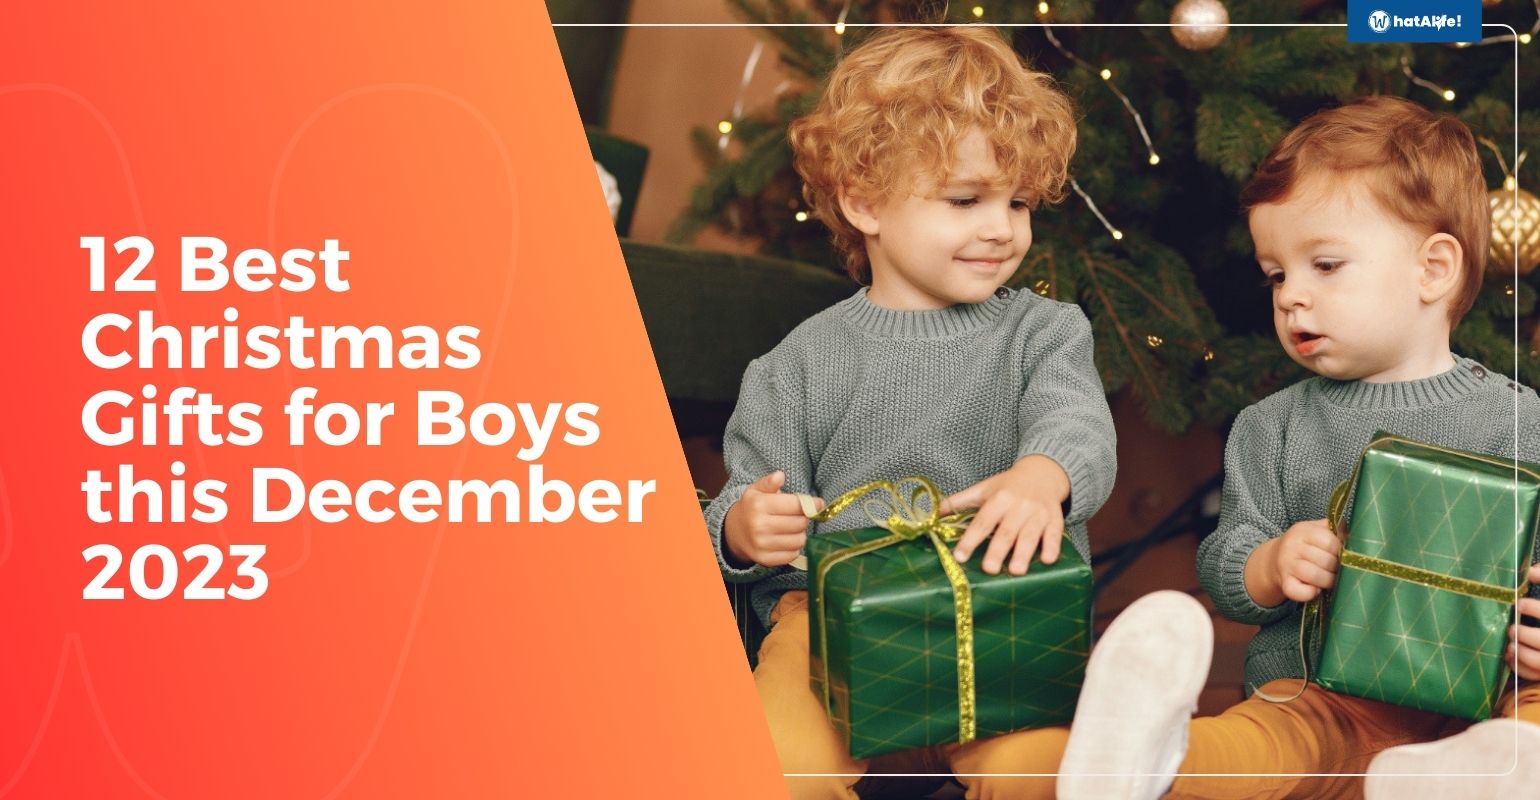 12 Best Christmas Gifts for Boys this December 2023